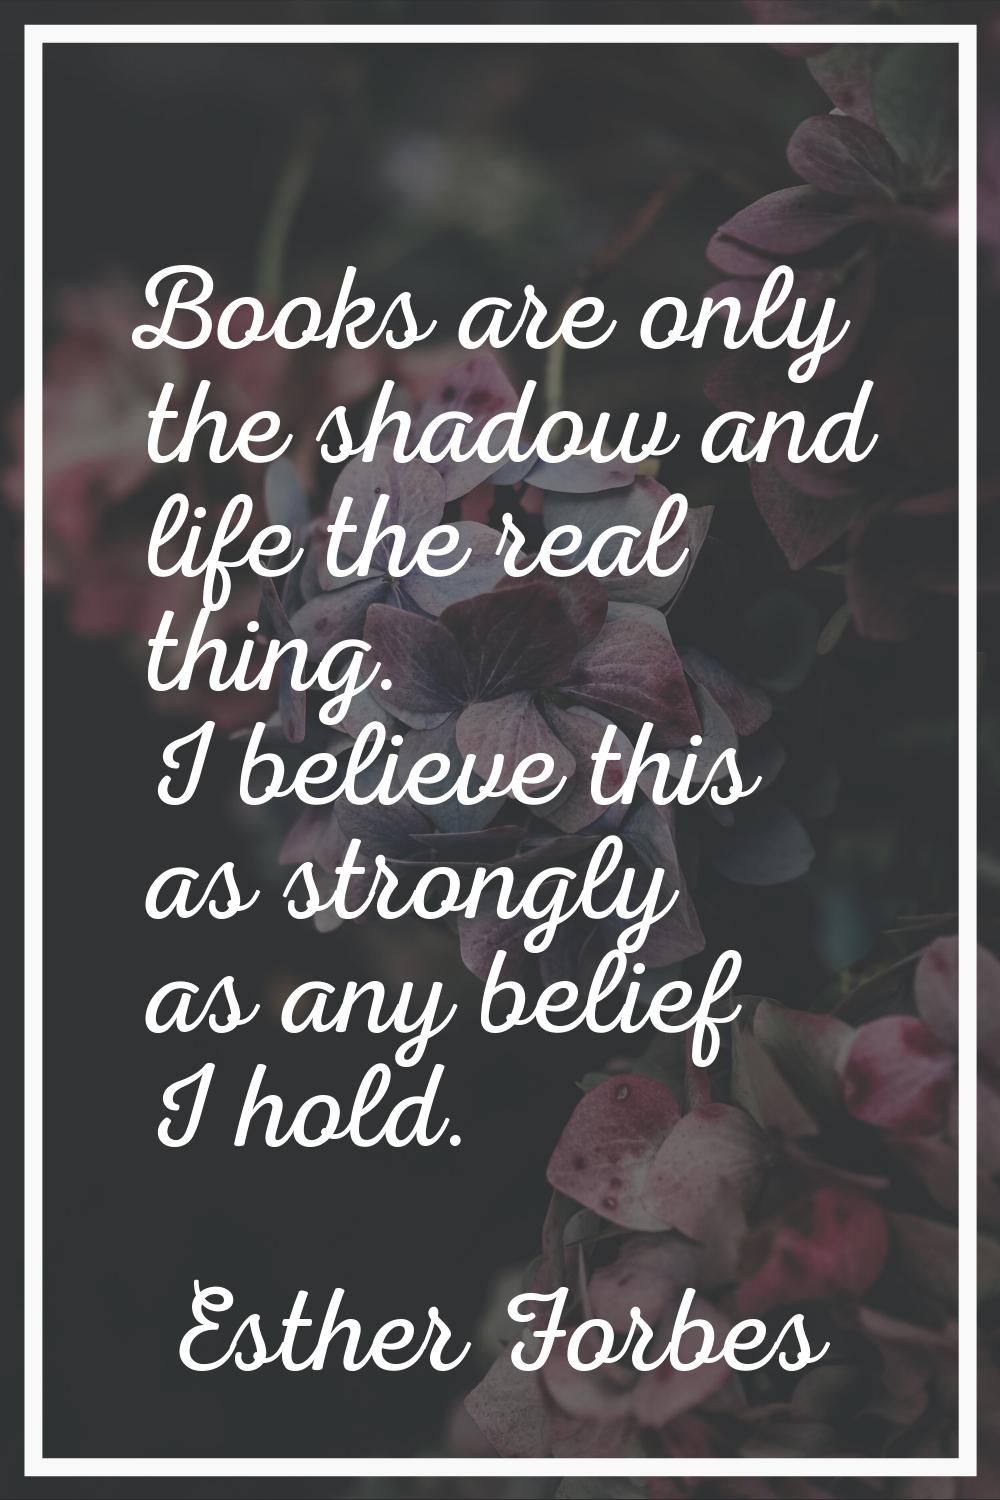 Books are only the shadow and life the real thing. I believe this as strongly as any belief I hold.